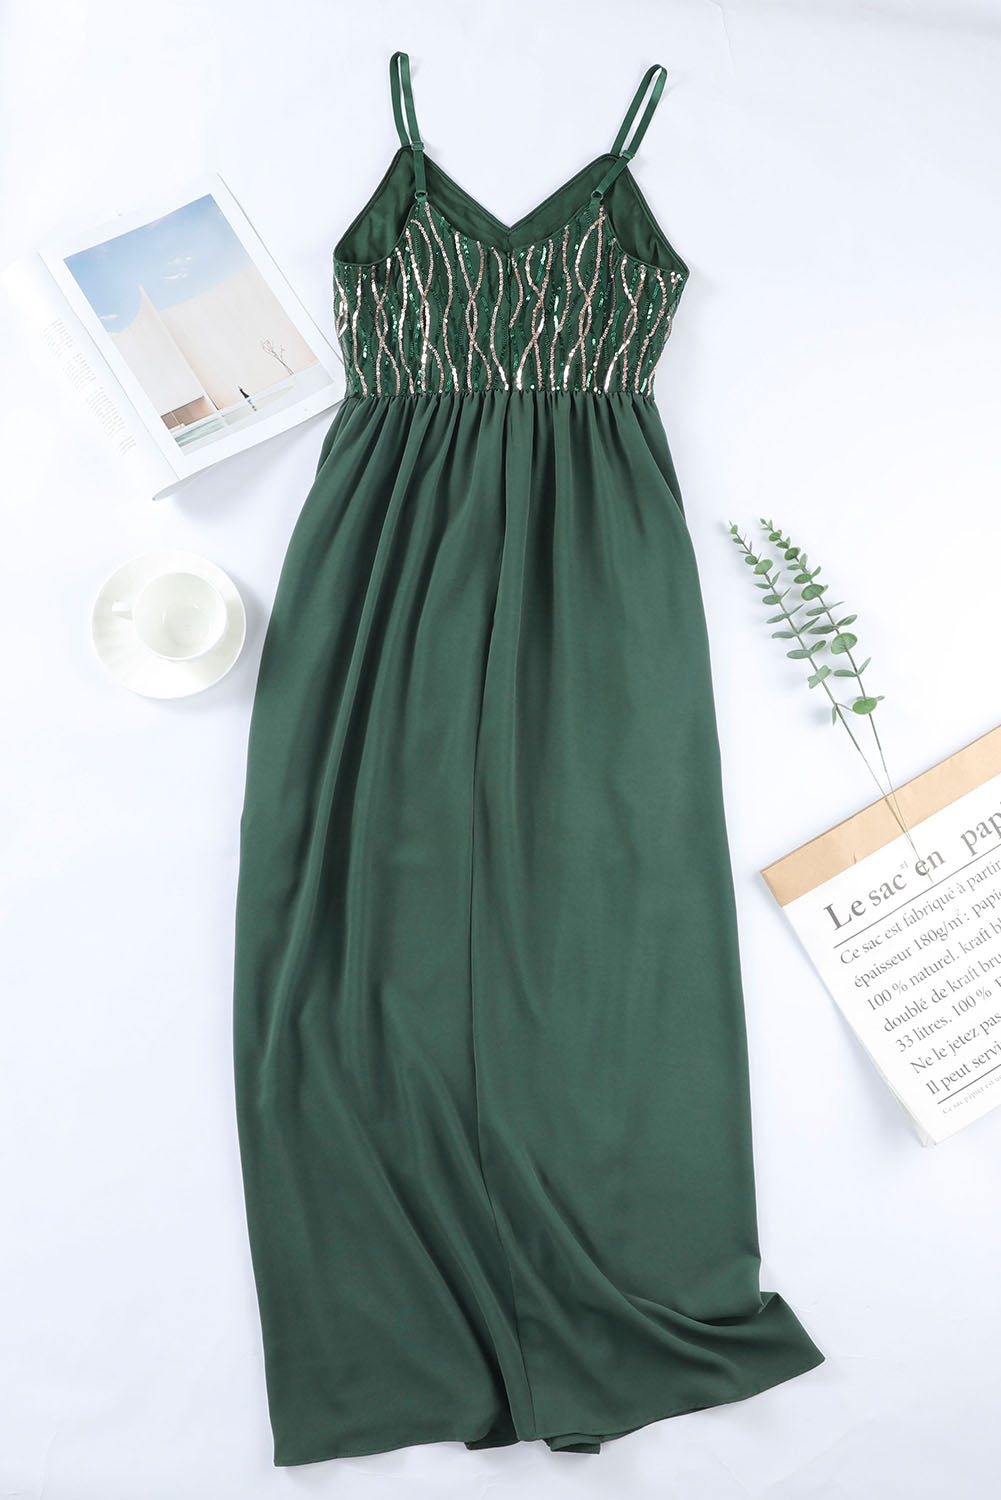 Green Sequin Lines Bodice High Waist Gown - EBEPEX